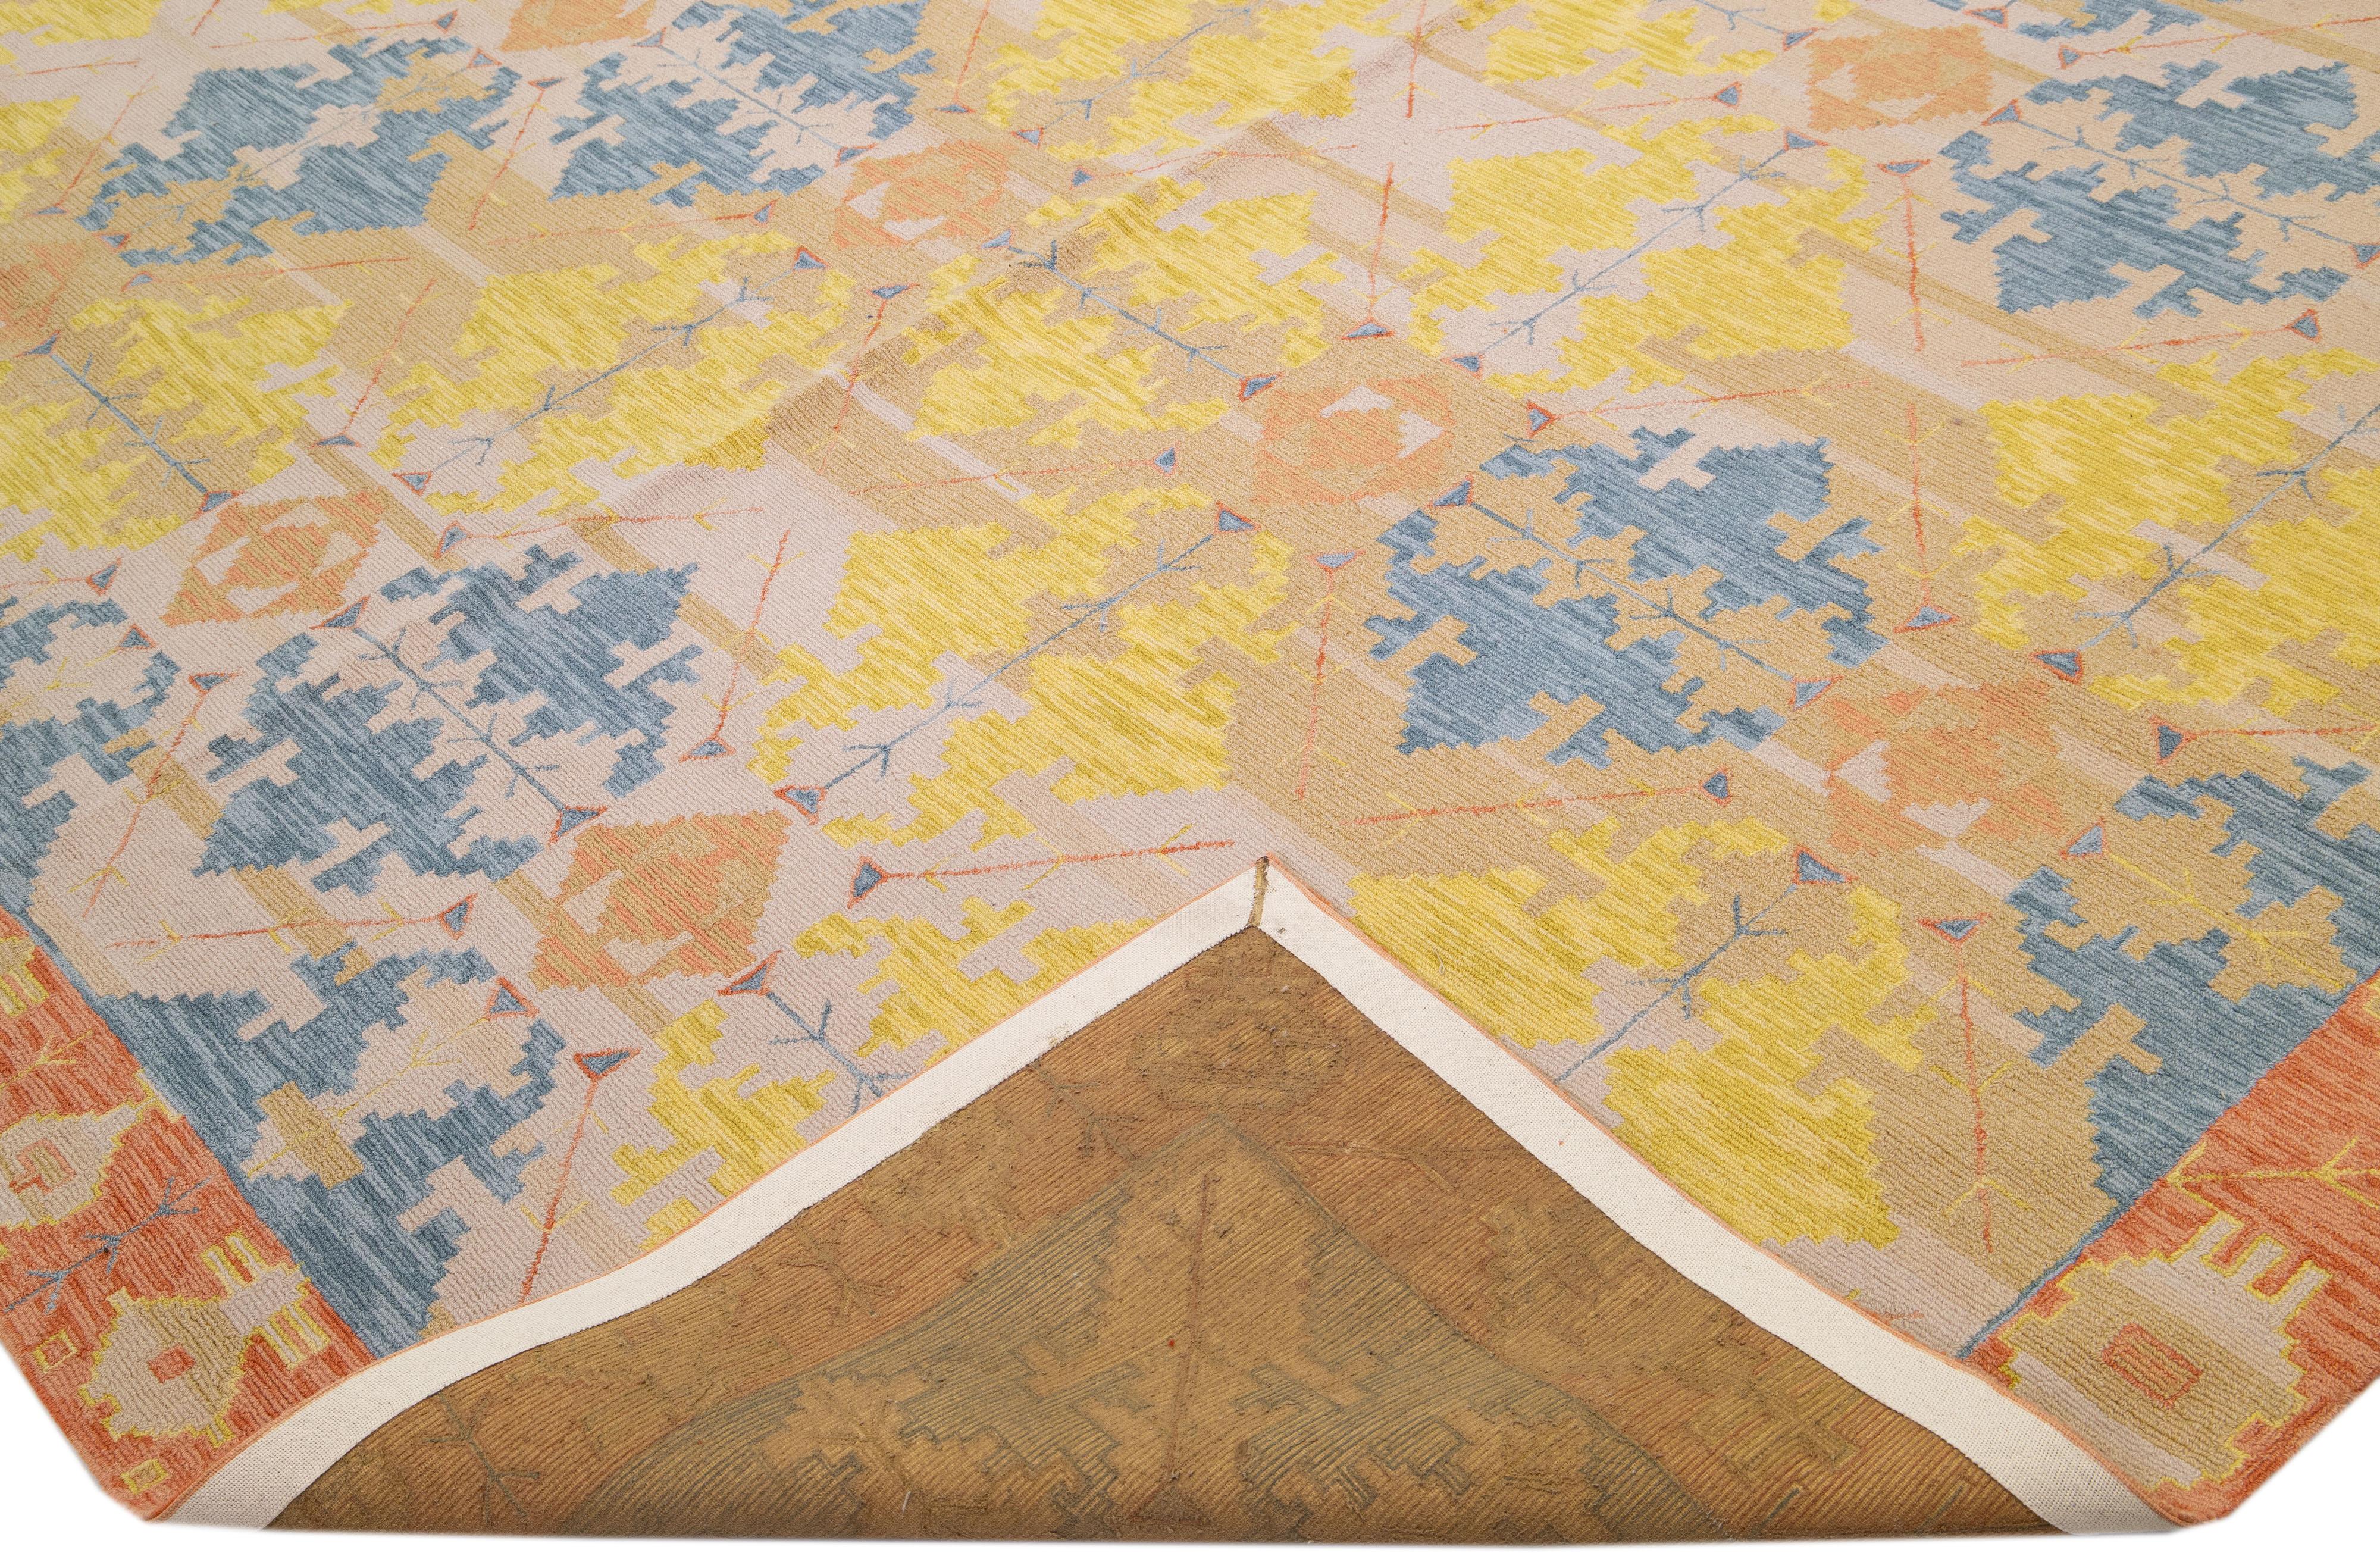 Beautiful Modern hand-knotted wool rug with a beige color field. This piece has a gorgeous blue, yellow, and orange accents layout in a transitional geometric design.

This rug measures: 14'9